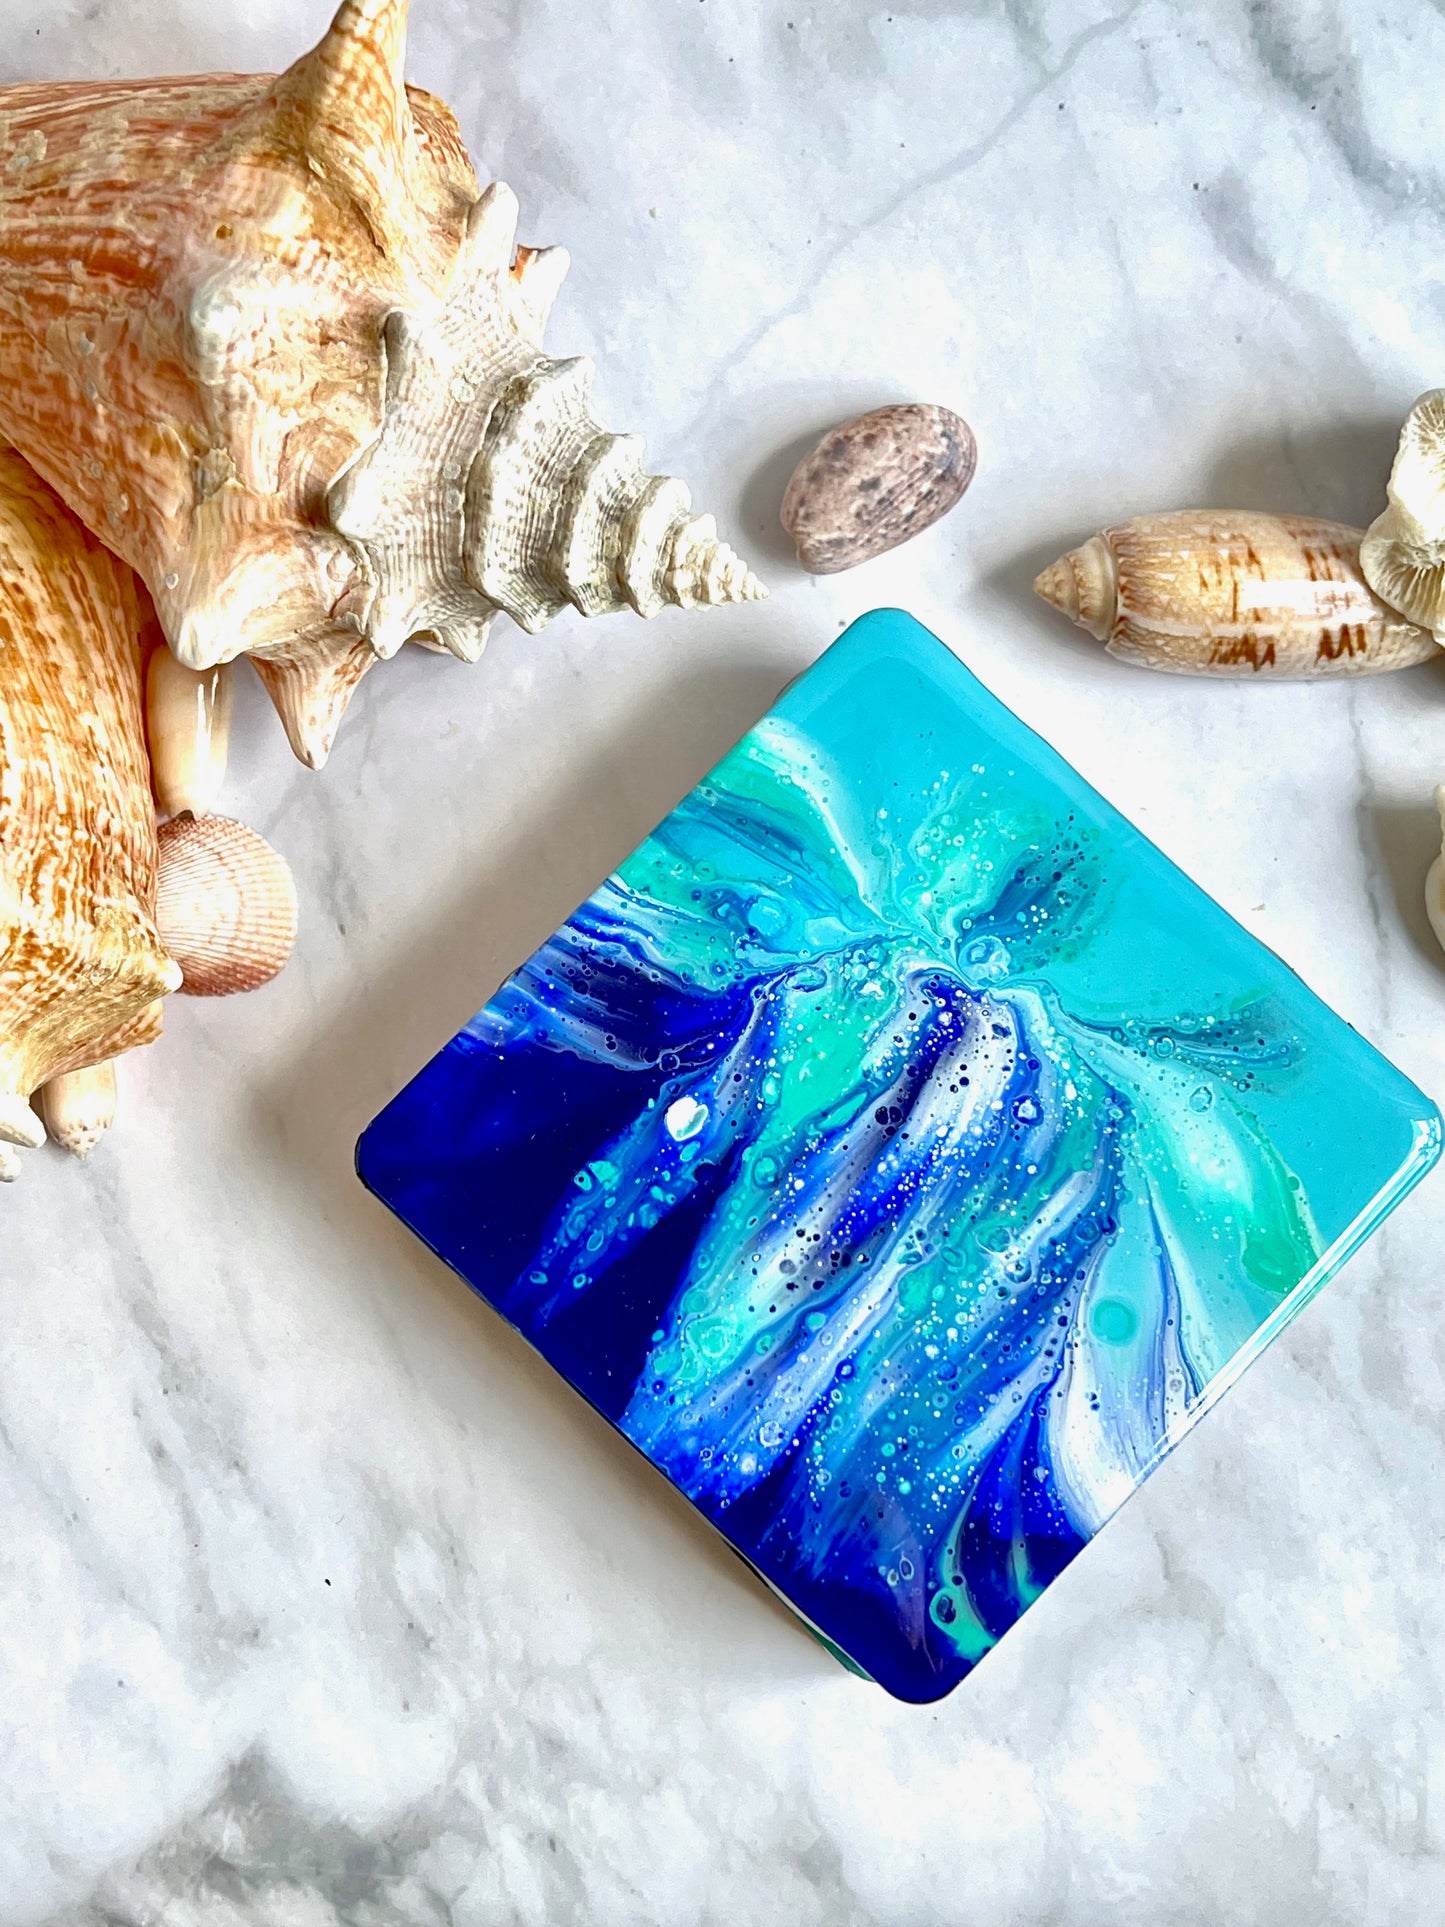 Colorful Acrylic Paint Epoxy Resin Coasters Set Of Four: Great Gift For Him, Her or Housewarming. Coastal Charm For Your Bar Or Coffee Table